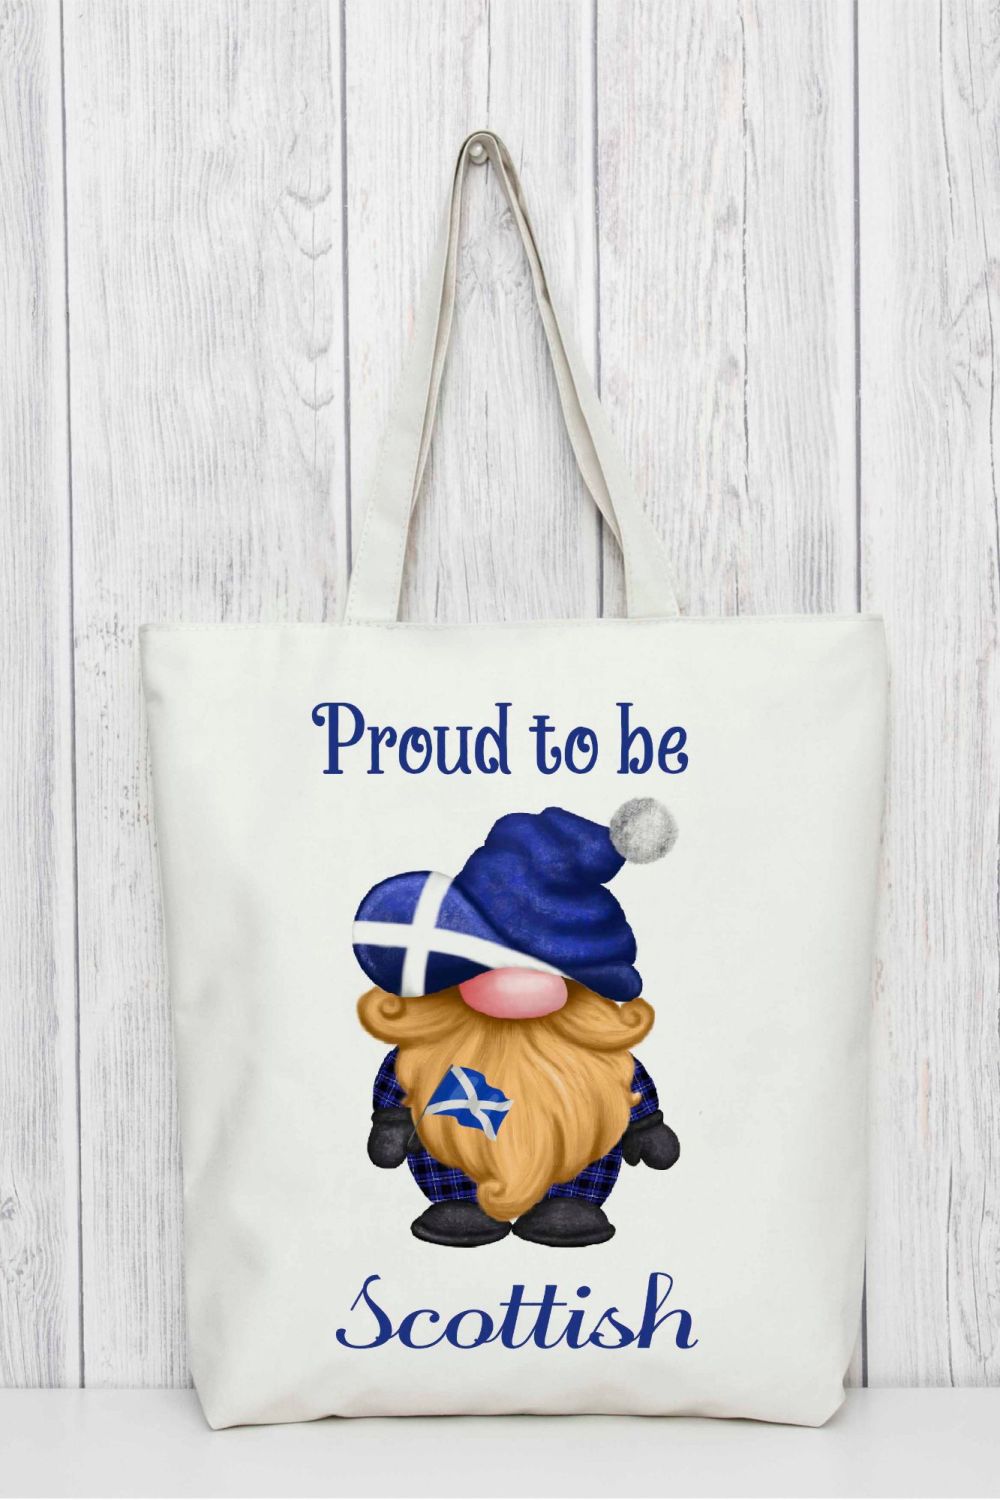 Scottish handbags scarves purses clothes with a modern take on tradition